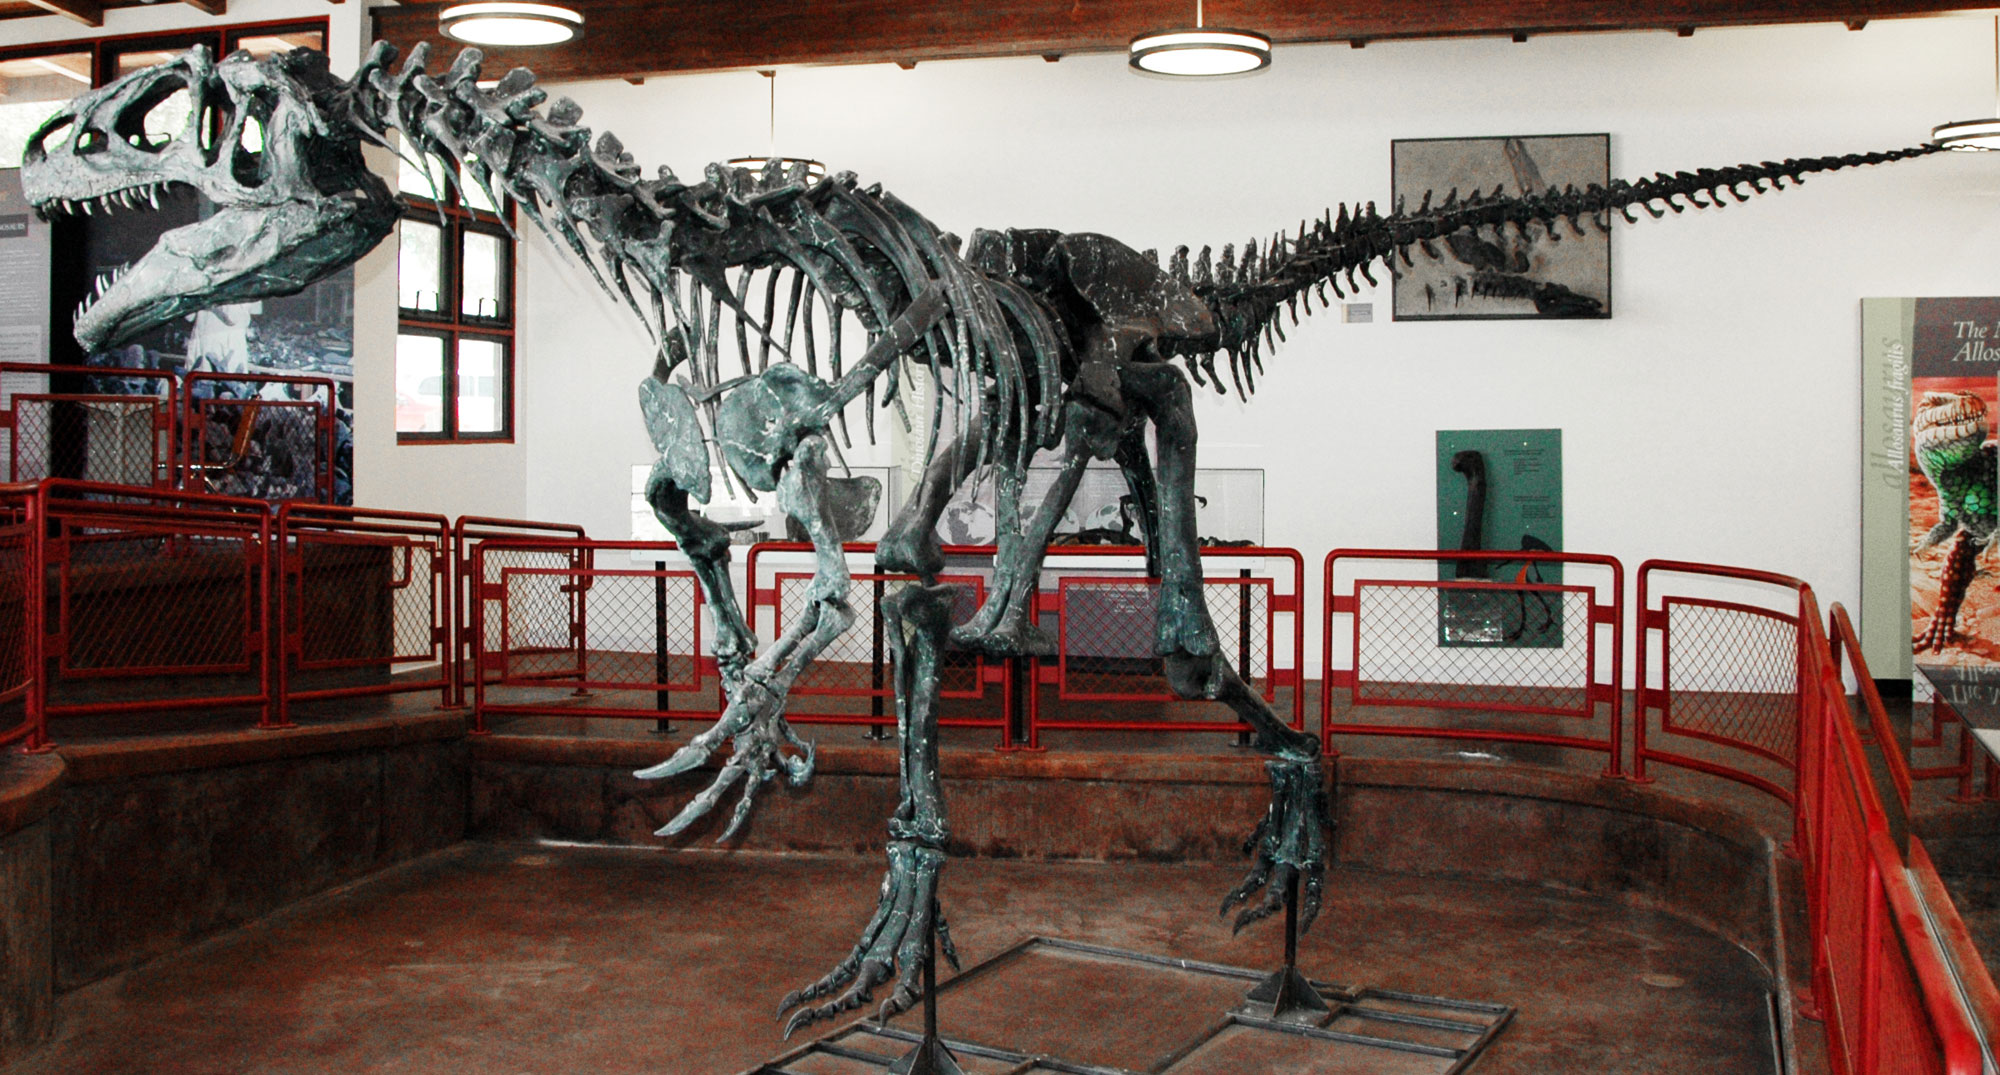 Photograph of a mounted Allosaurus skeleton at Cleveland-Lloyd quarry. The dinosaur is a predatory theropod. It has a relatively large head with pointed teeth. The arms are robust and the hands have large claws. The dinosaur is bipedal, and the feet also have large claws. The tail is extended in back of the body and held off the ground.